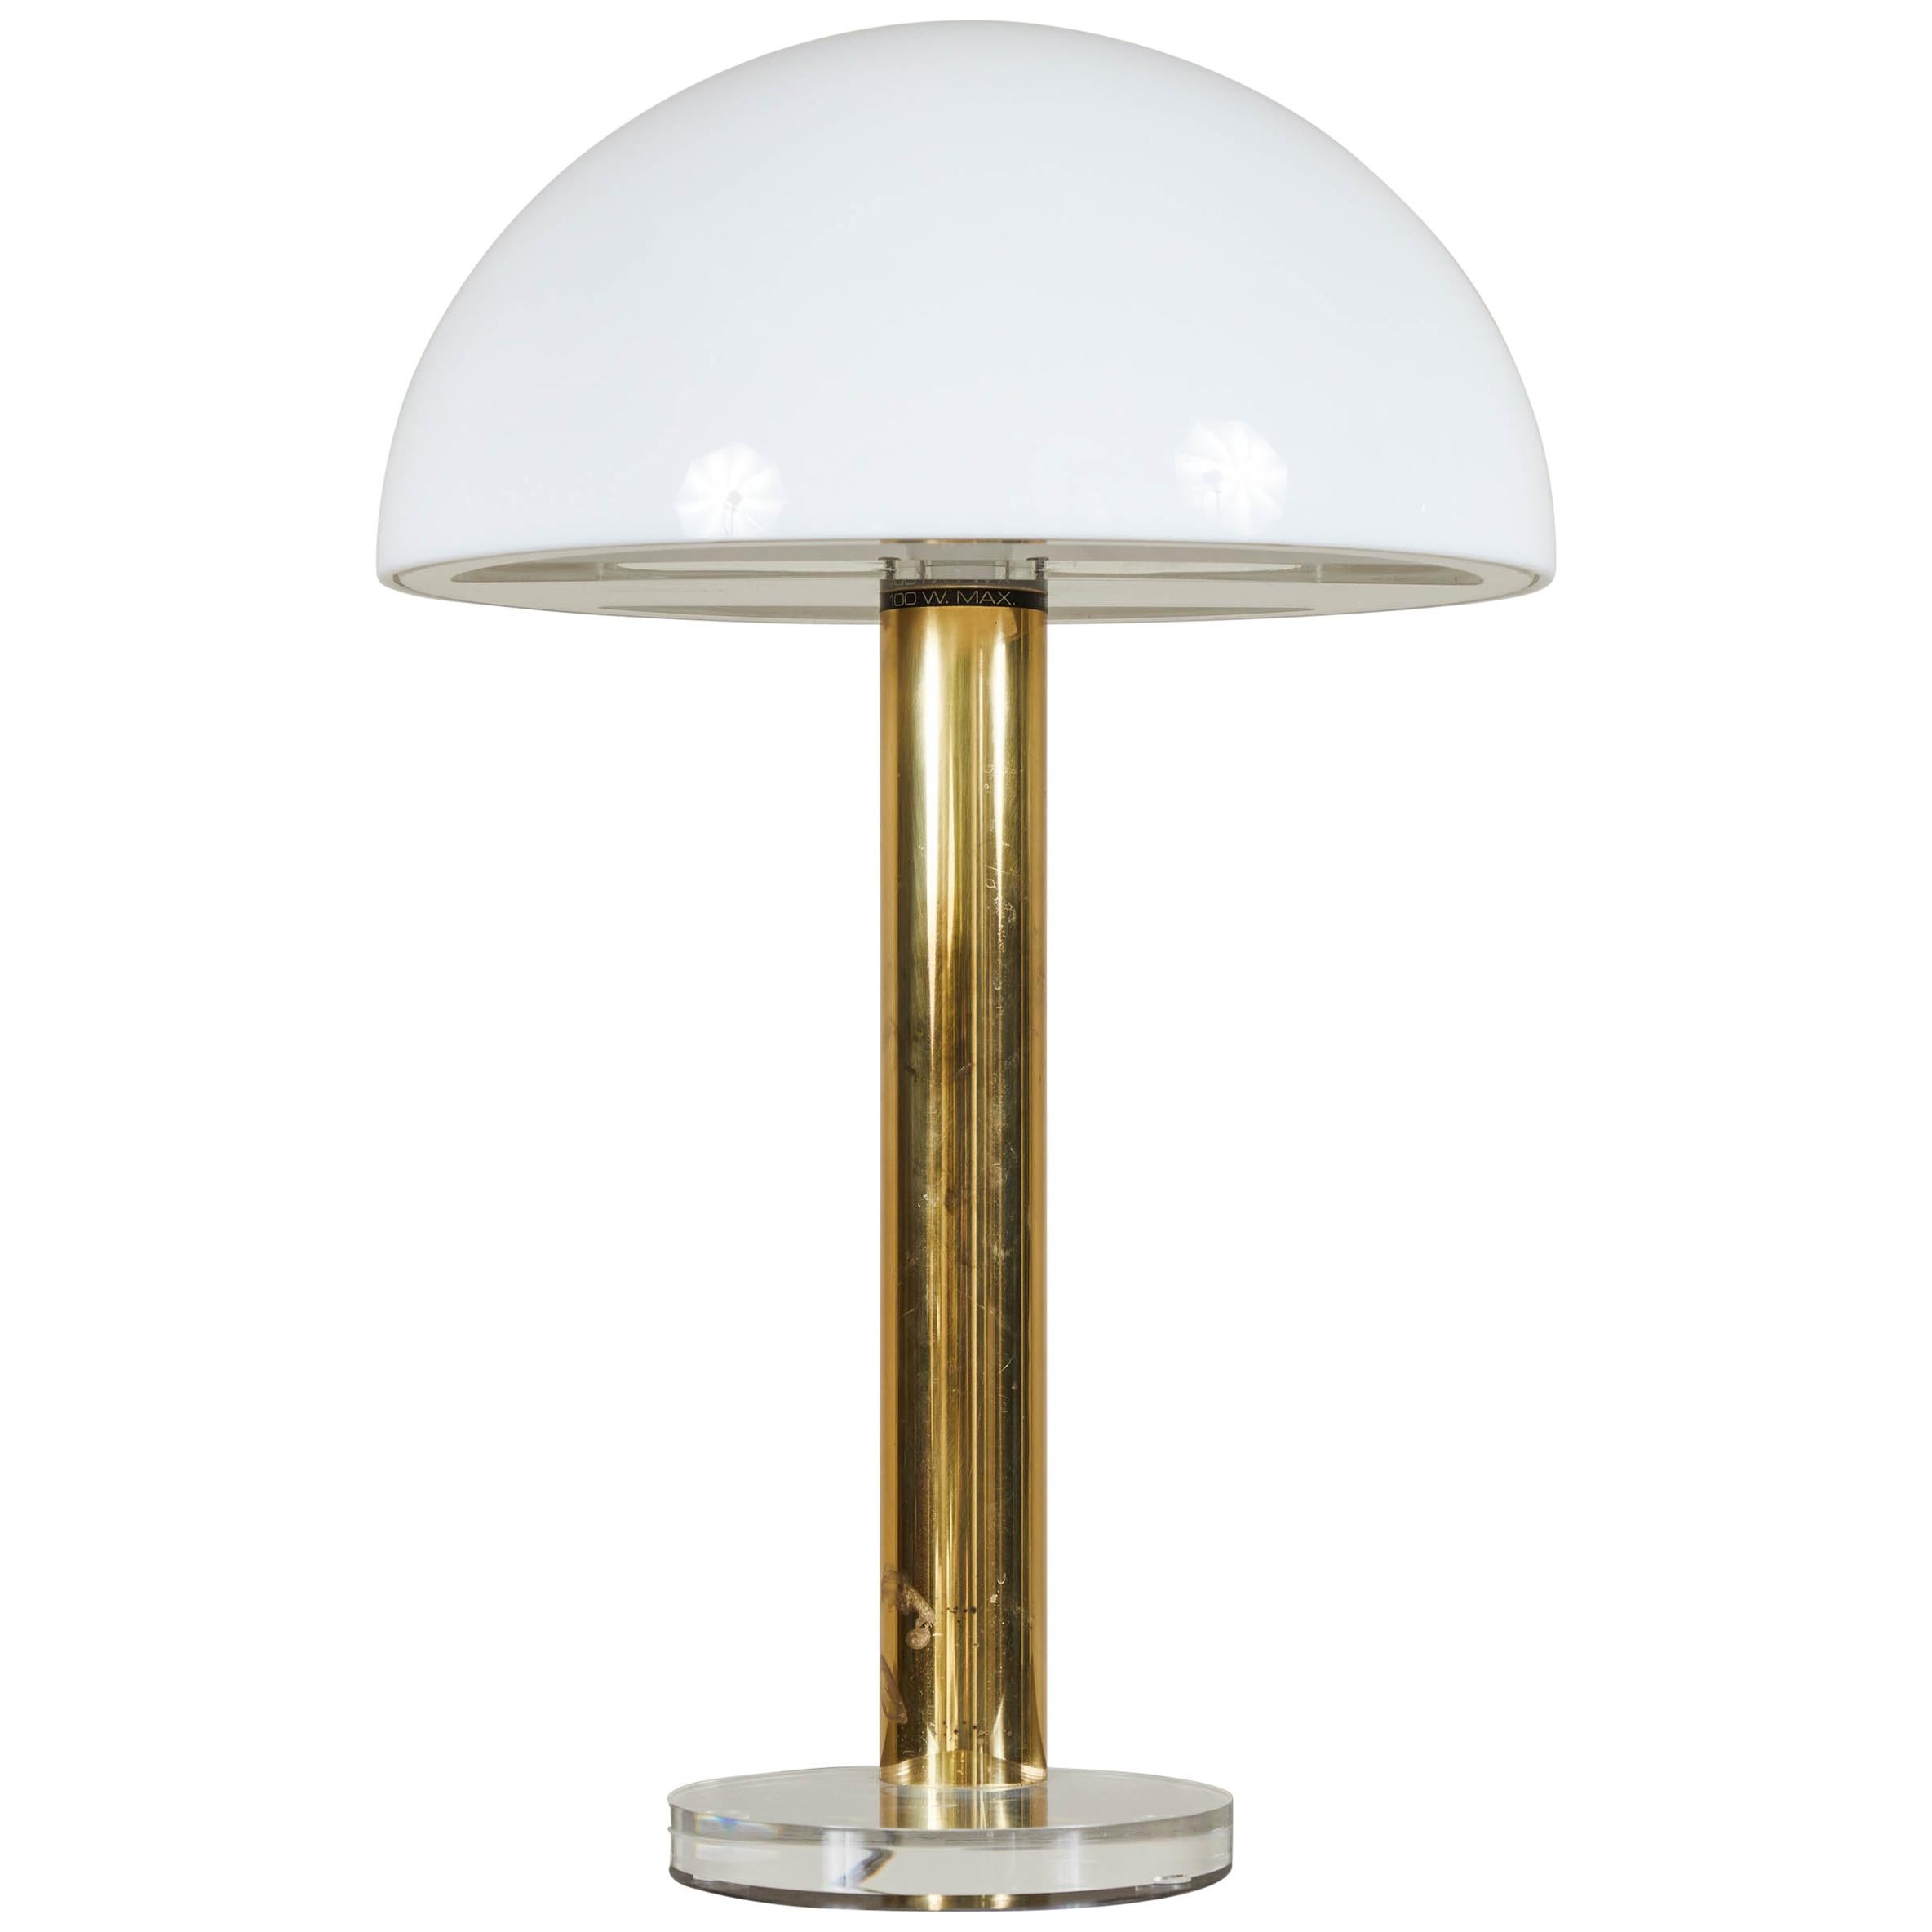 Gage Cauchois 1980s Brass and Lucite Touch Lamp